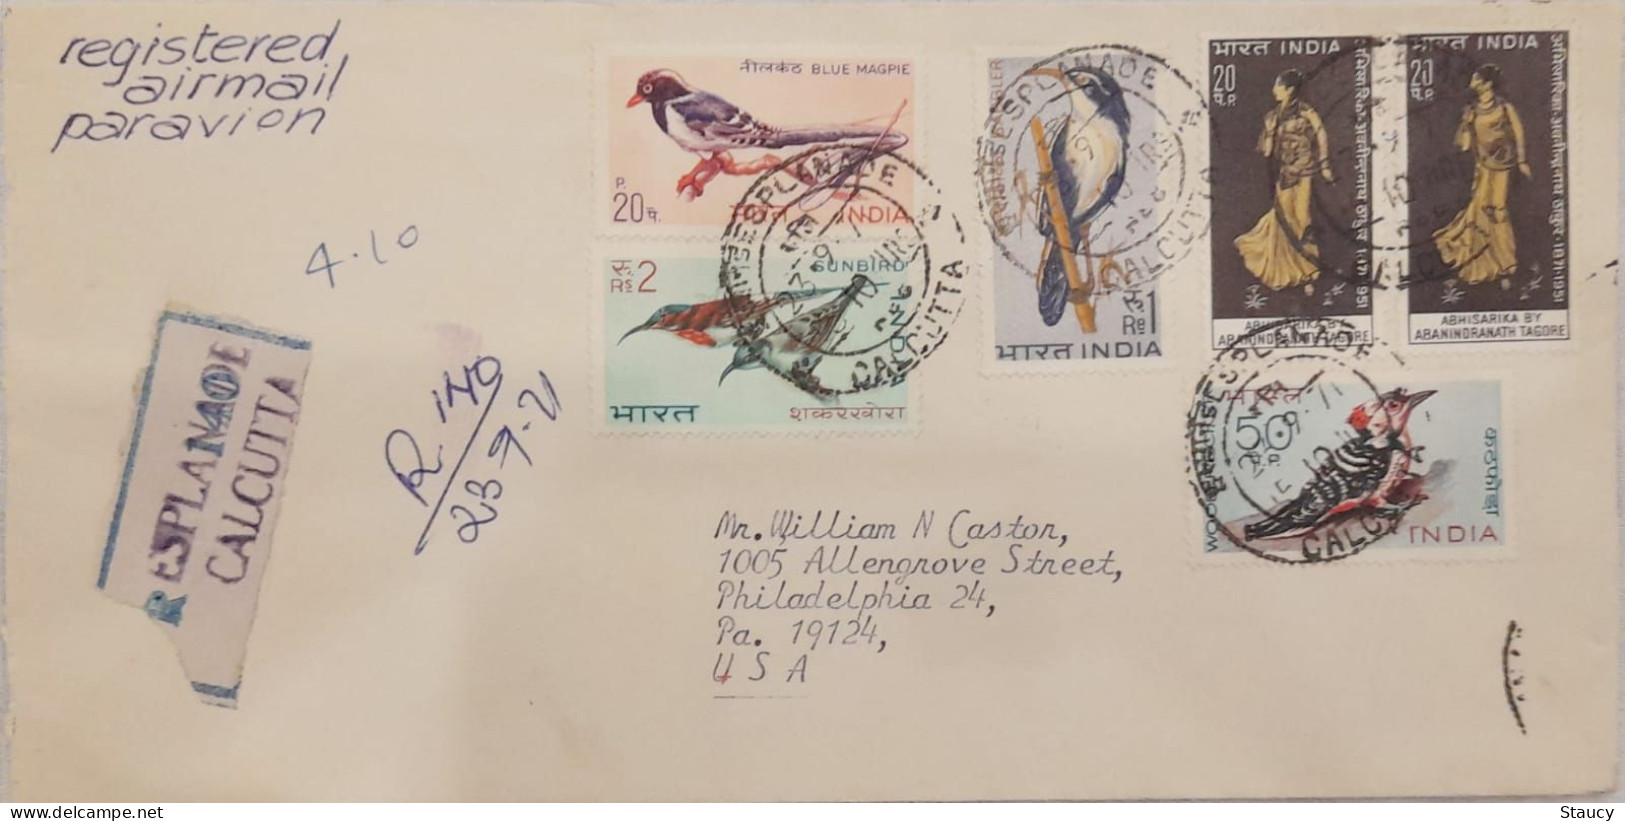 India 1968 BIRDS~Wildlife Preservation - Fauna / Birds Complete Set Of 4 Stamps USED On Registered Cover To USA As Scan - Posta Aerea